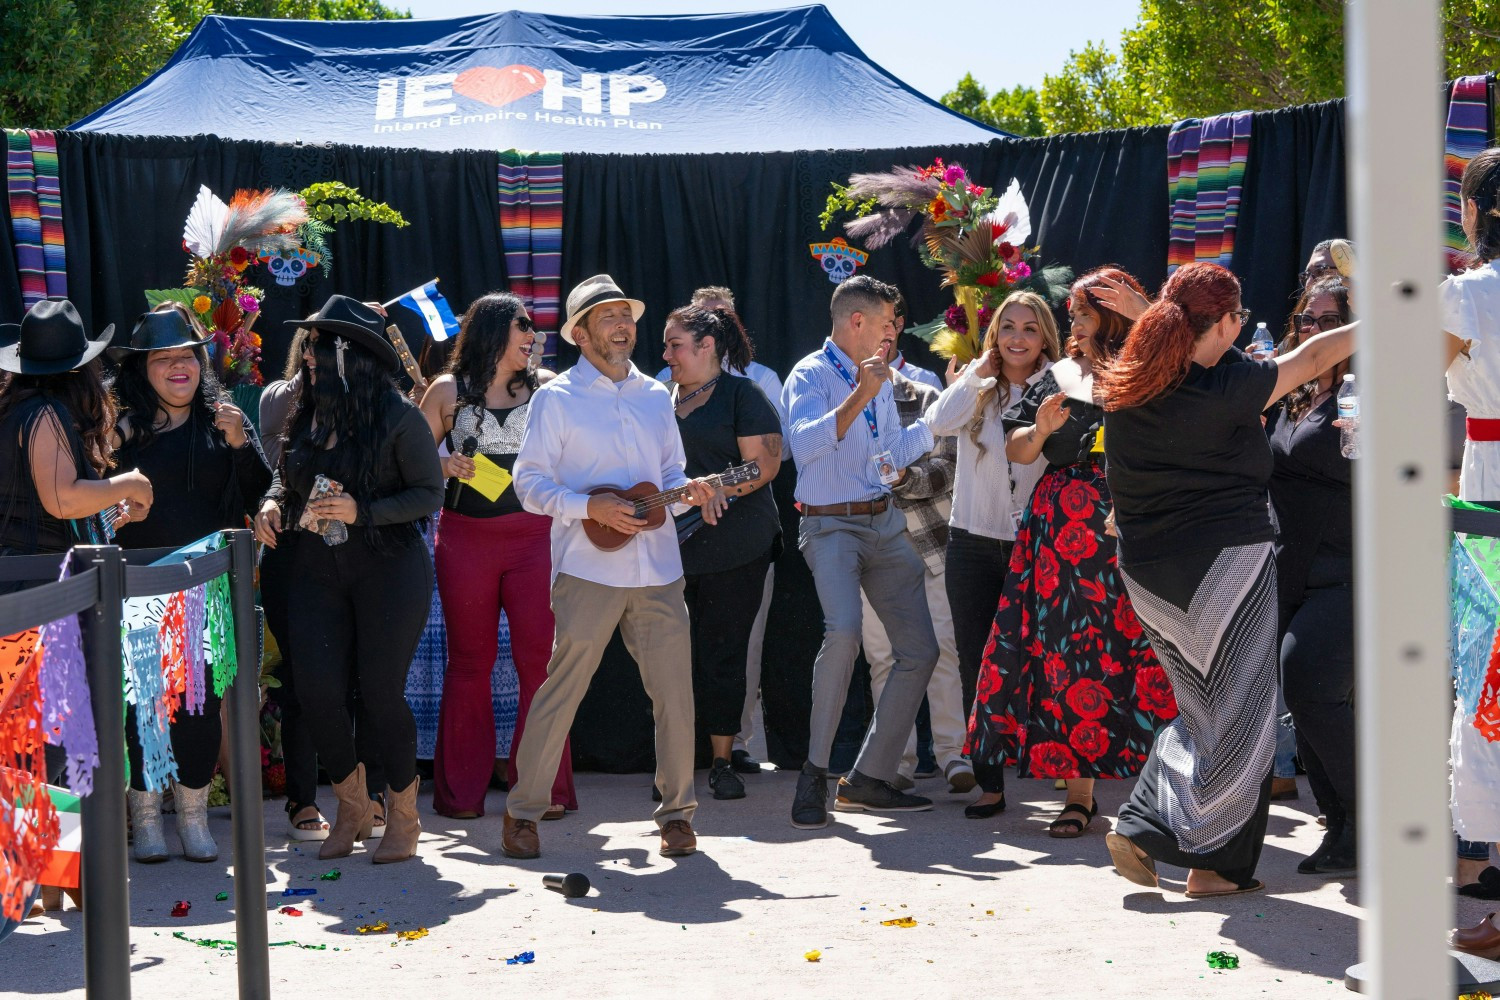 IEHO thrives in celebrating its diverse workforce and Inland Empire community, so let the dancing begin!